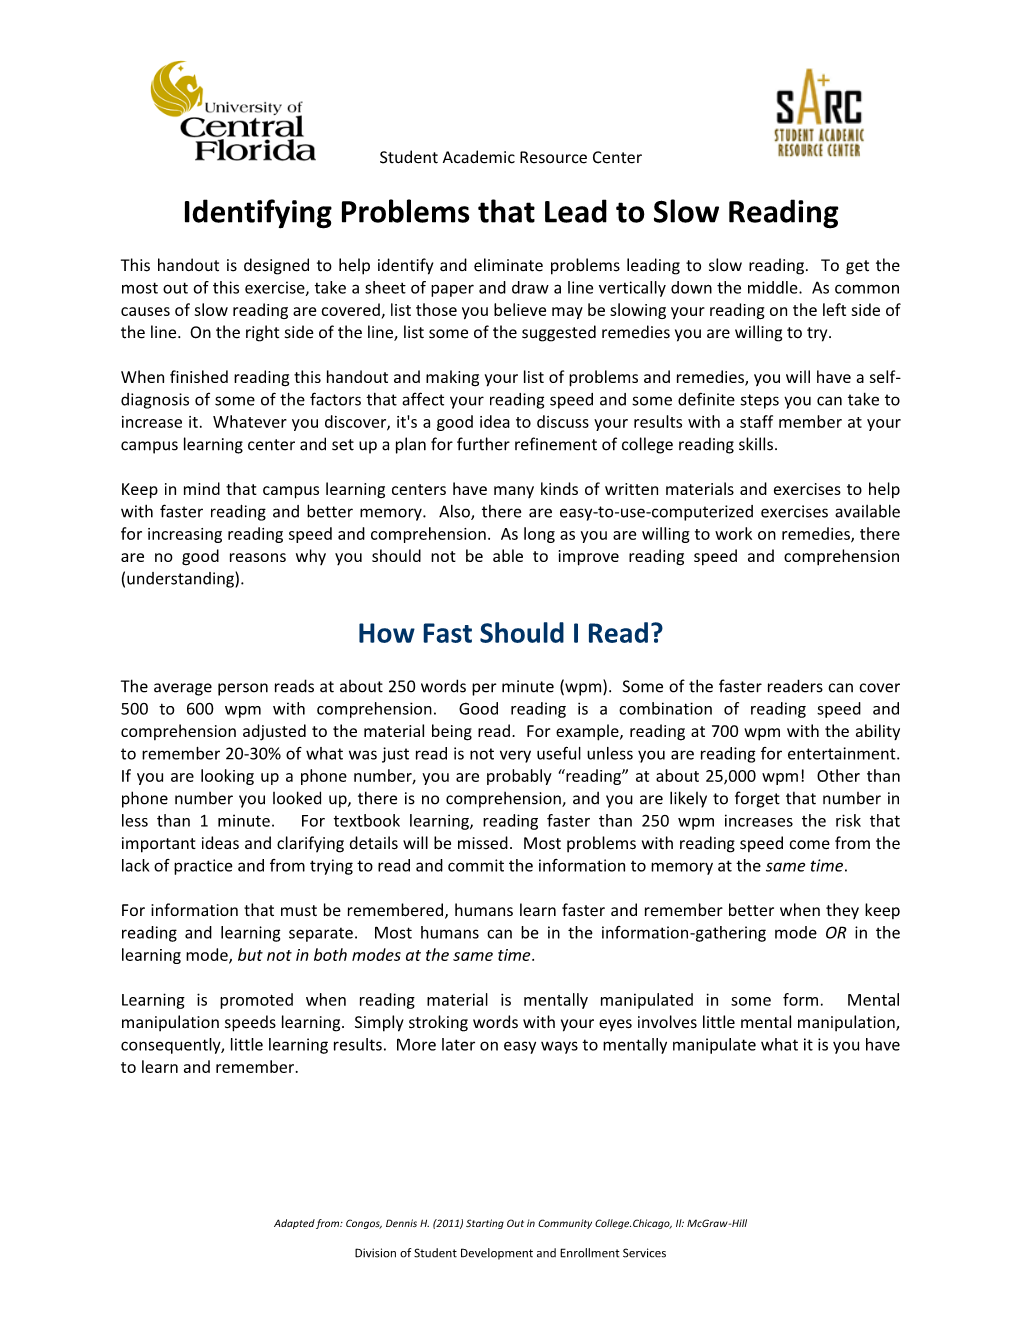 Identifying Problems That Lead to Slow Reading